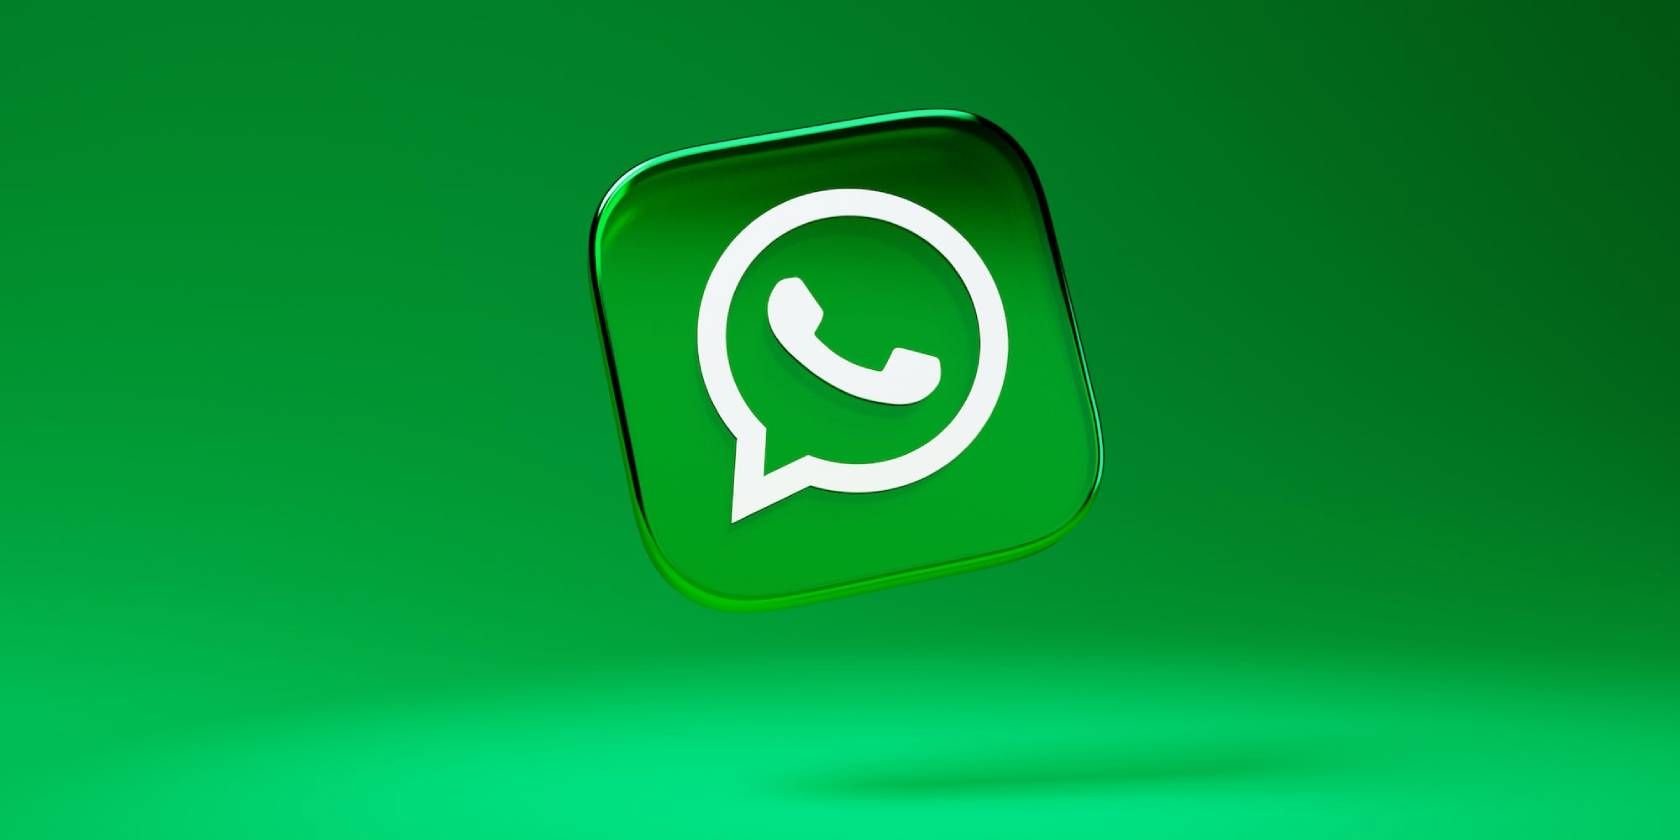 How to Create and Track a Poll on WhatsApp